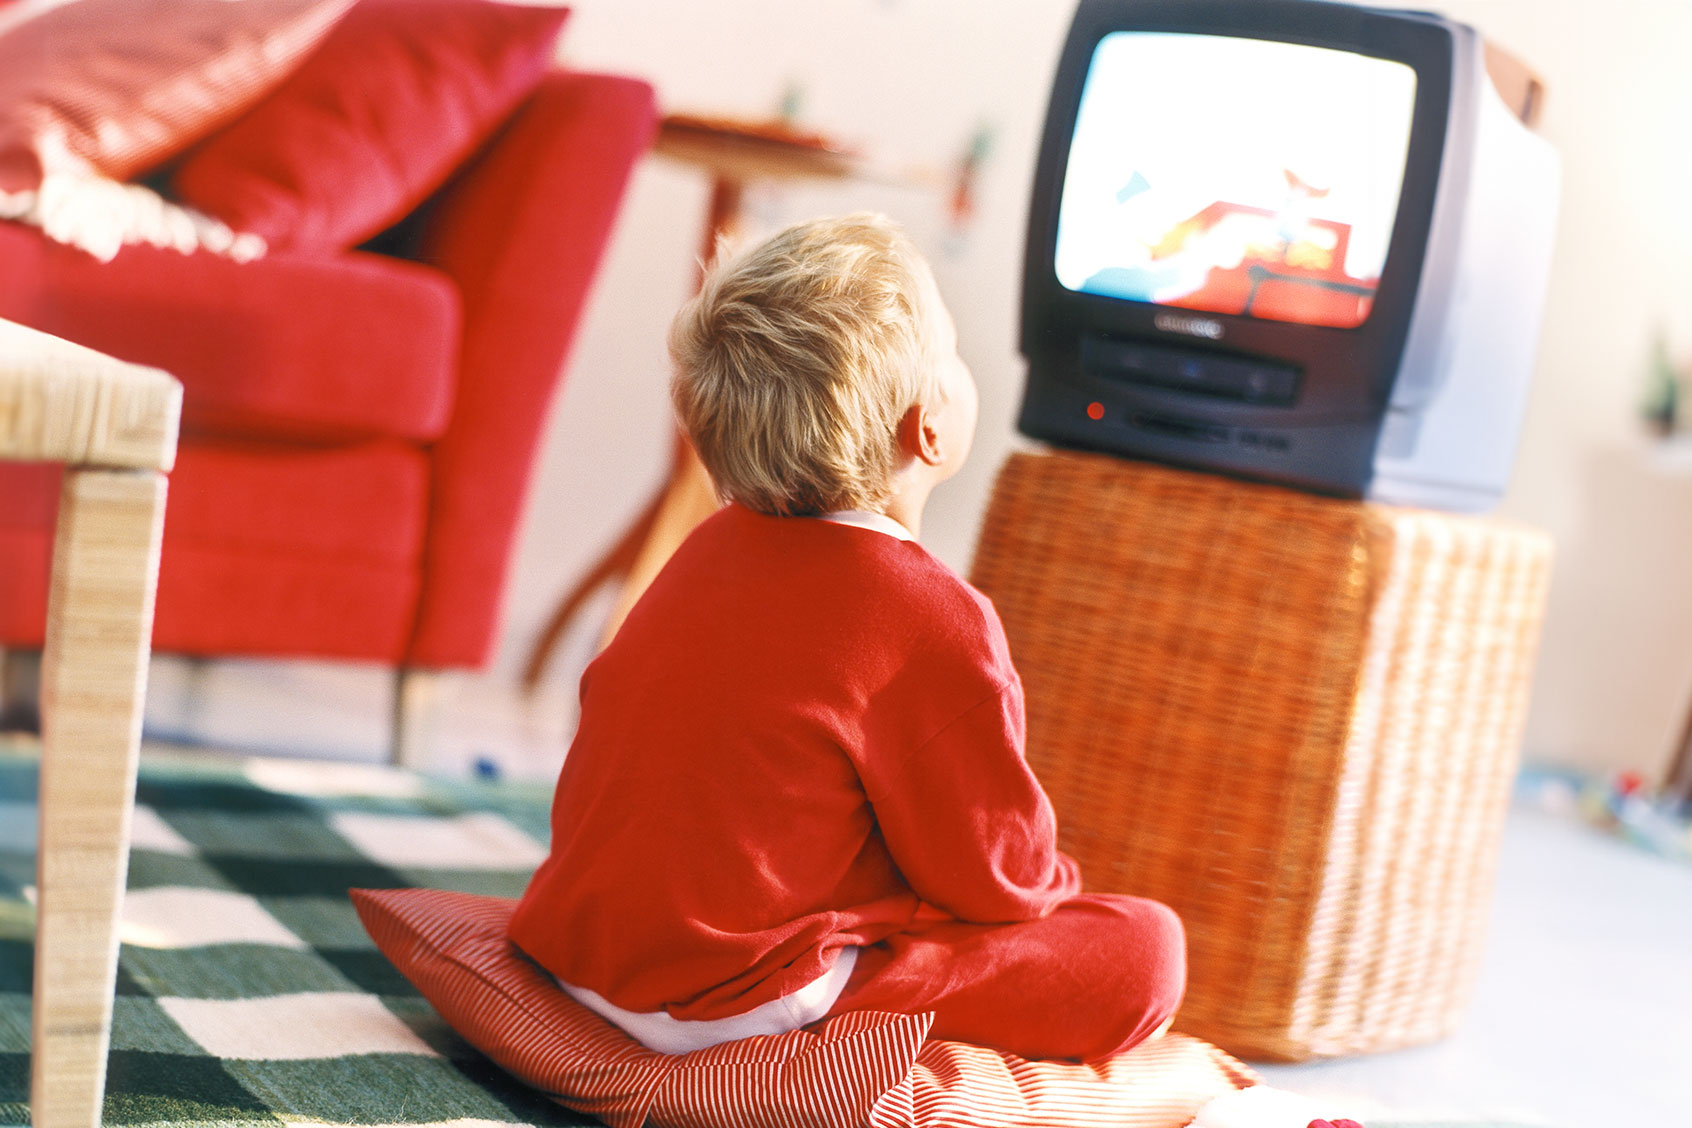 TV screen time associated with sensory differences in toddlerhood, study finds